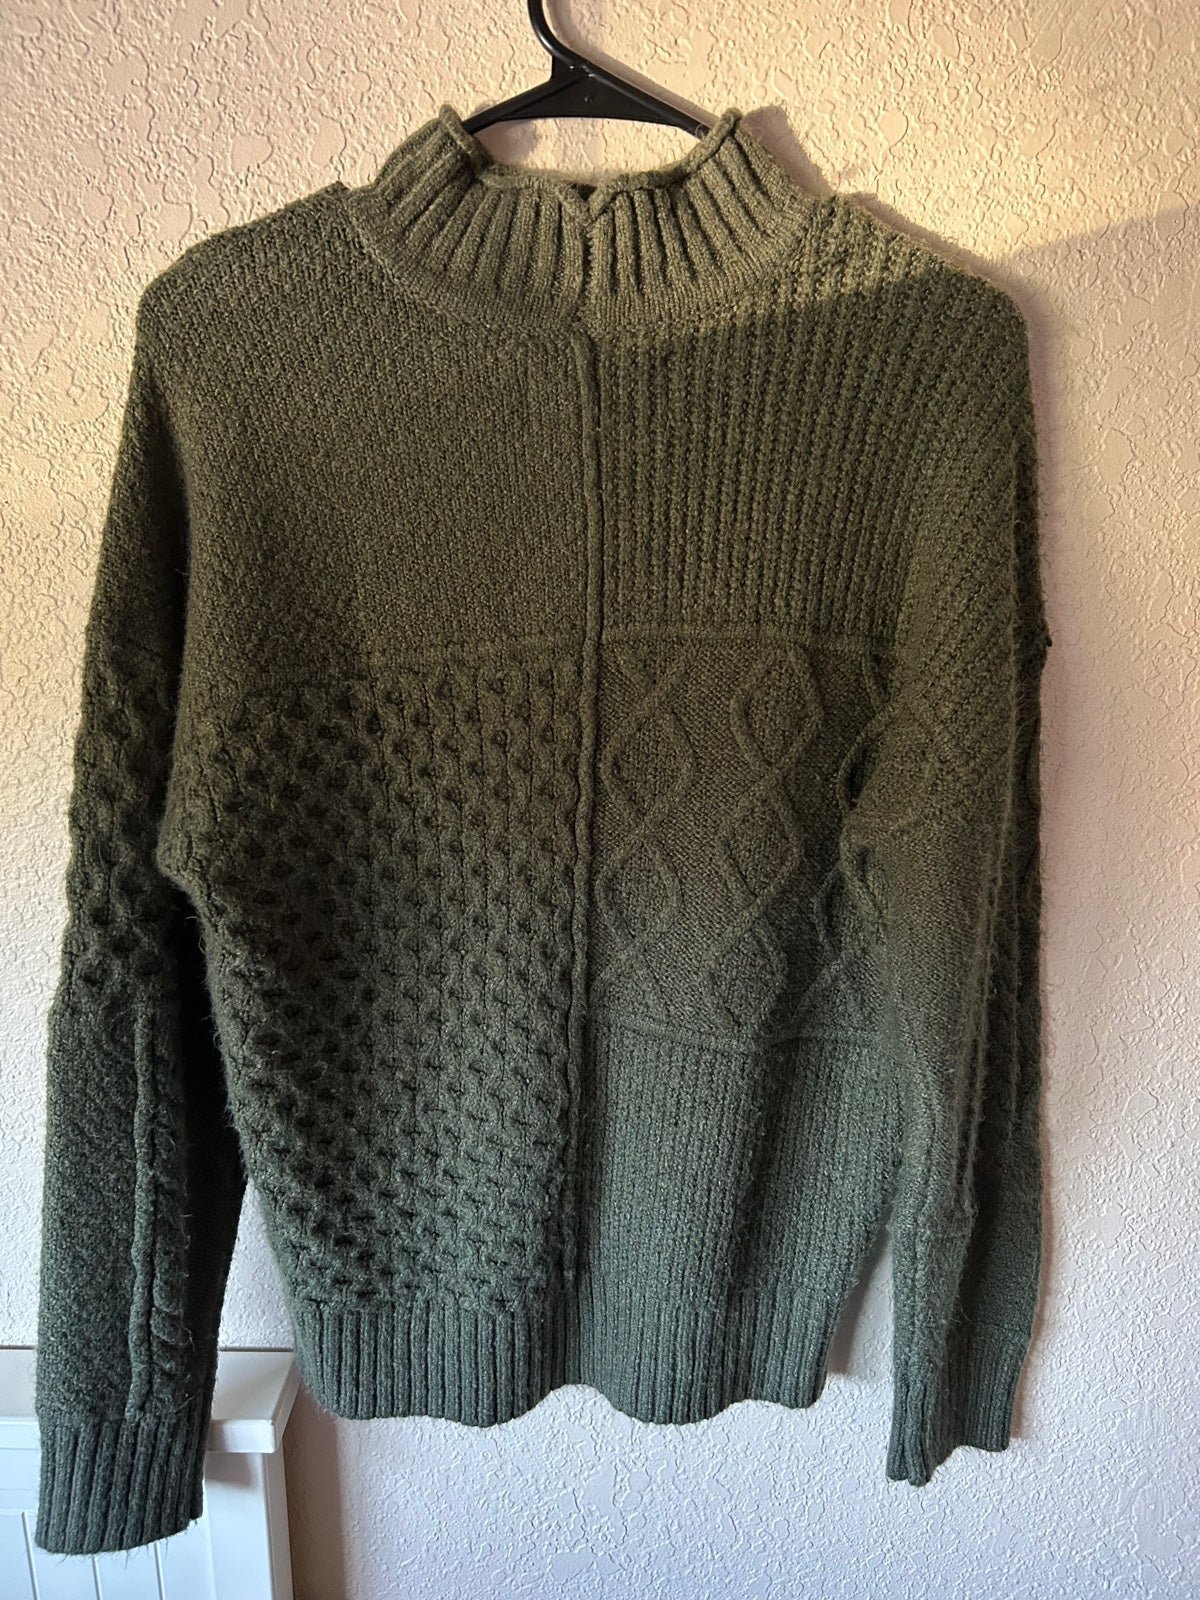 Promotions  American Eagle Sweater MGChjxkKt well sale